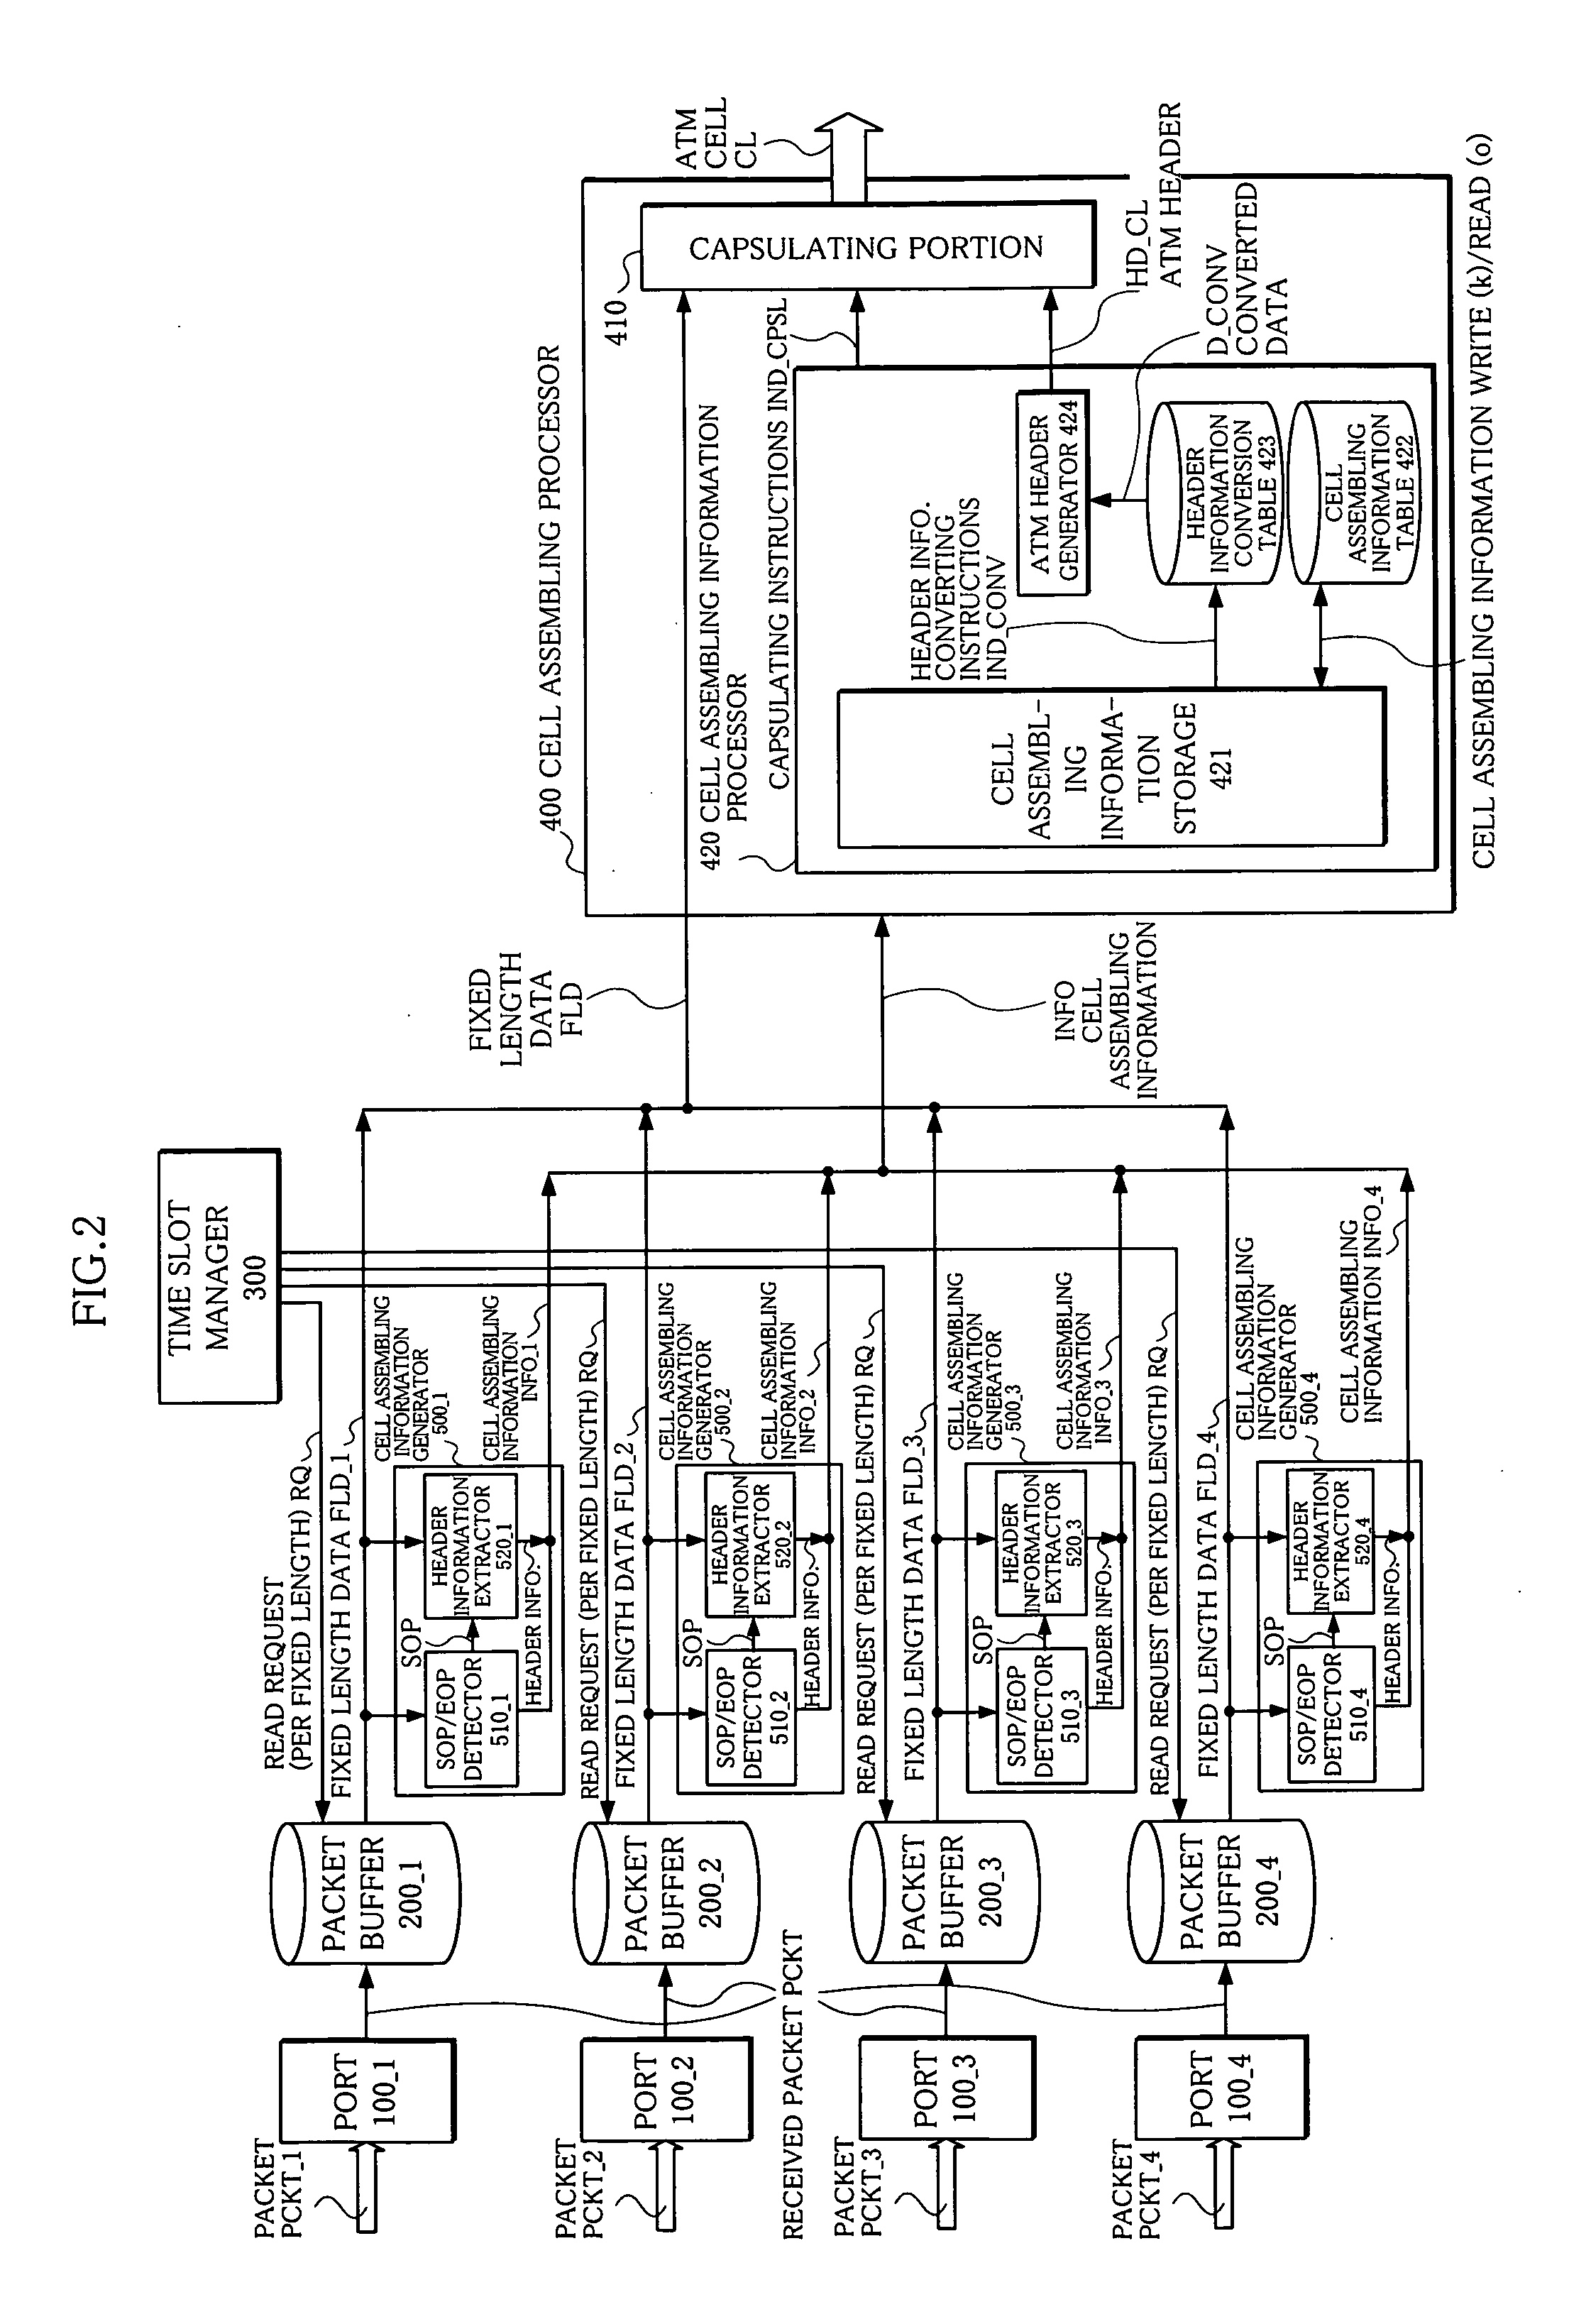 Cell assembling method and device